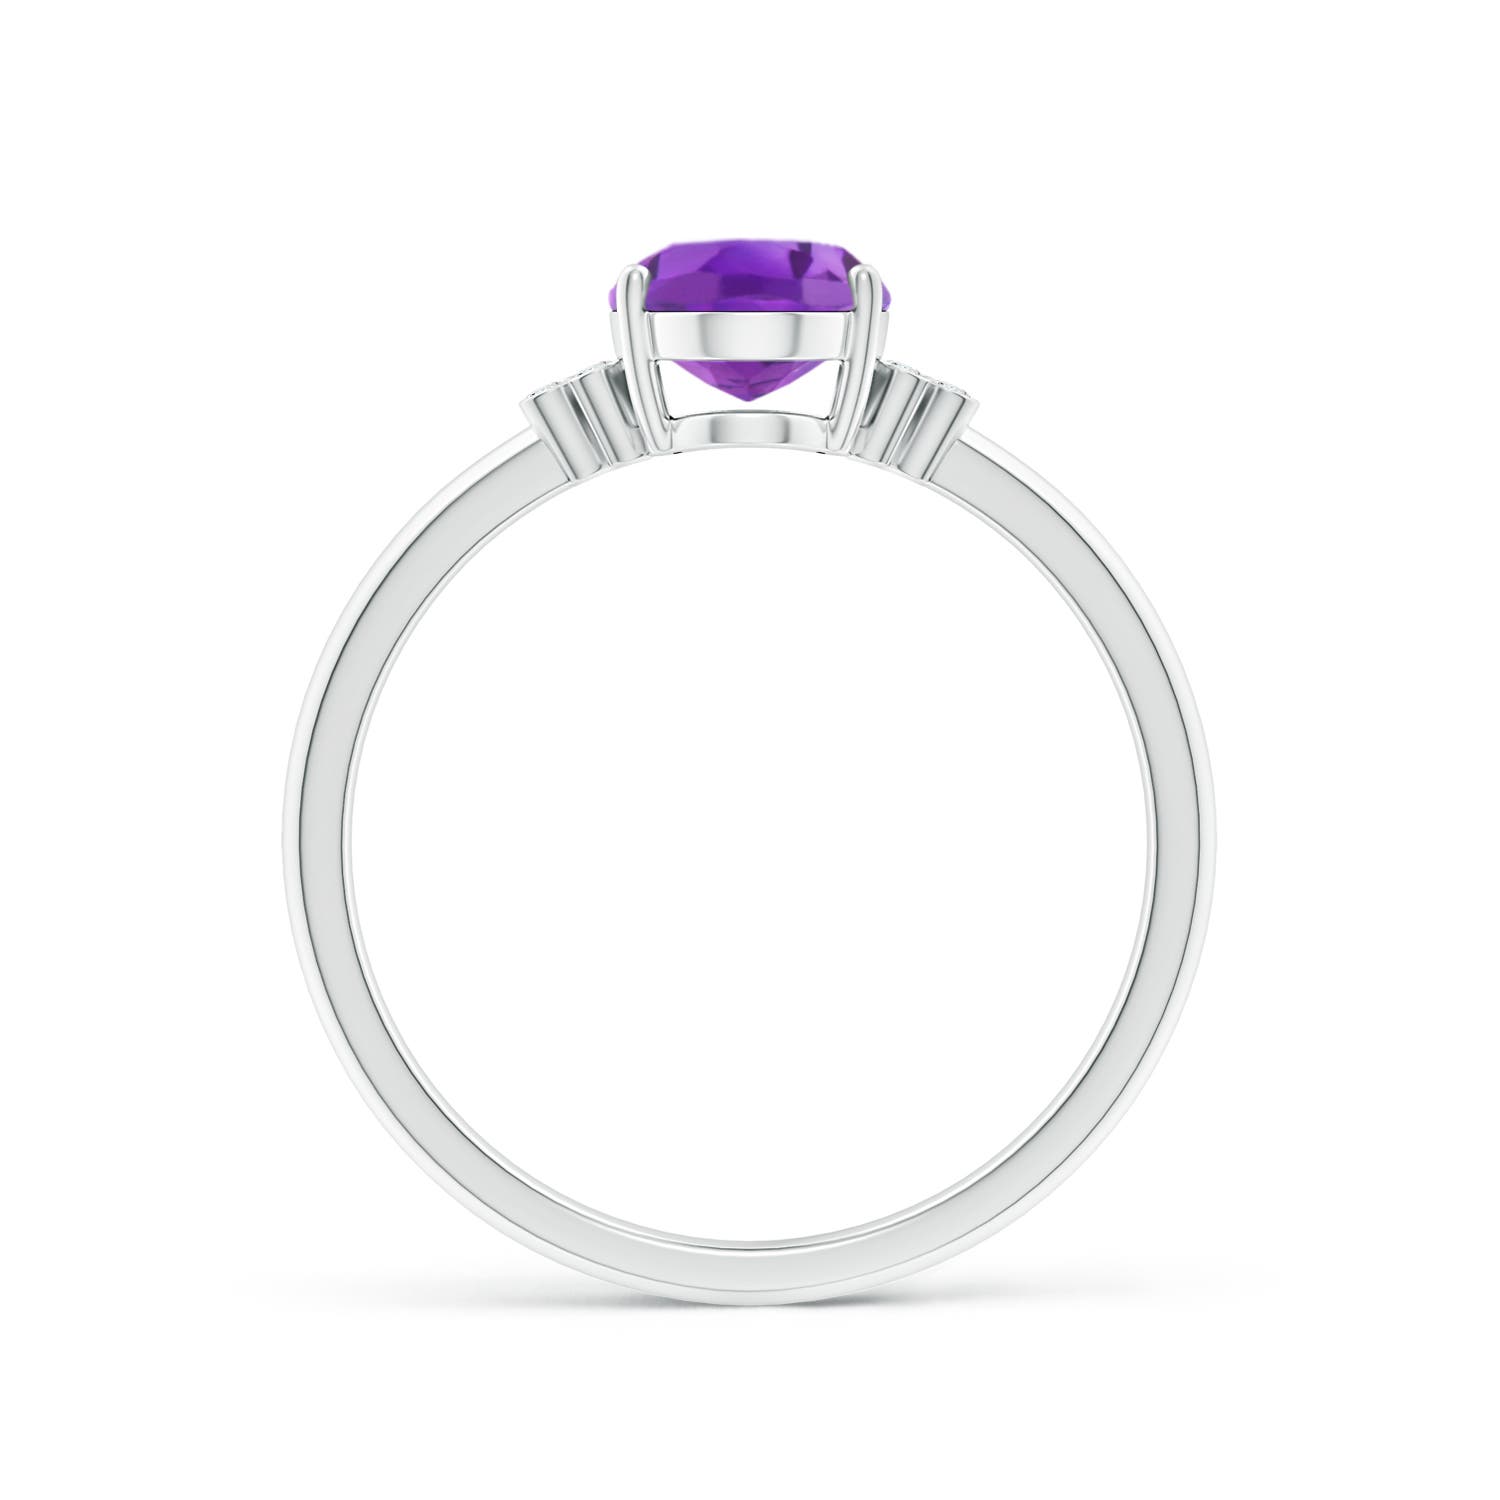 AA- Amethyst / 1.2 CT / 14 KT White Gold